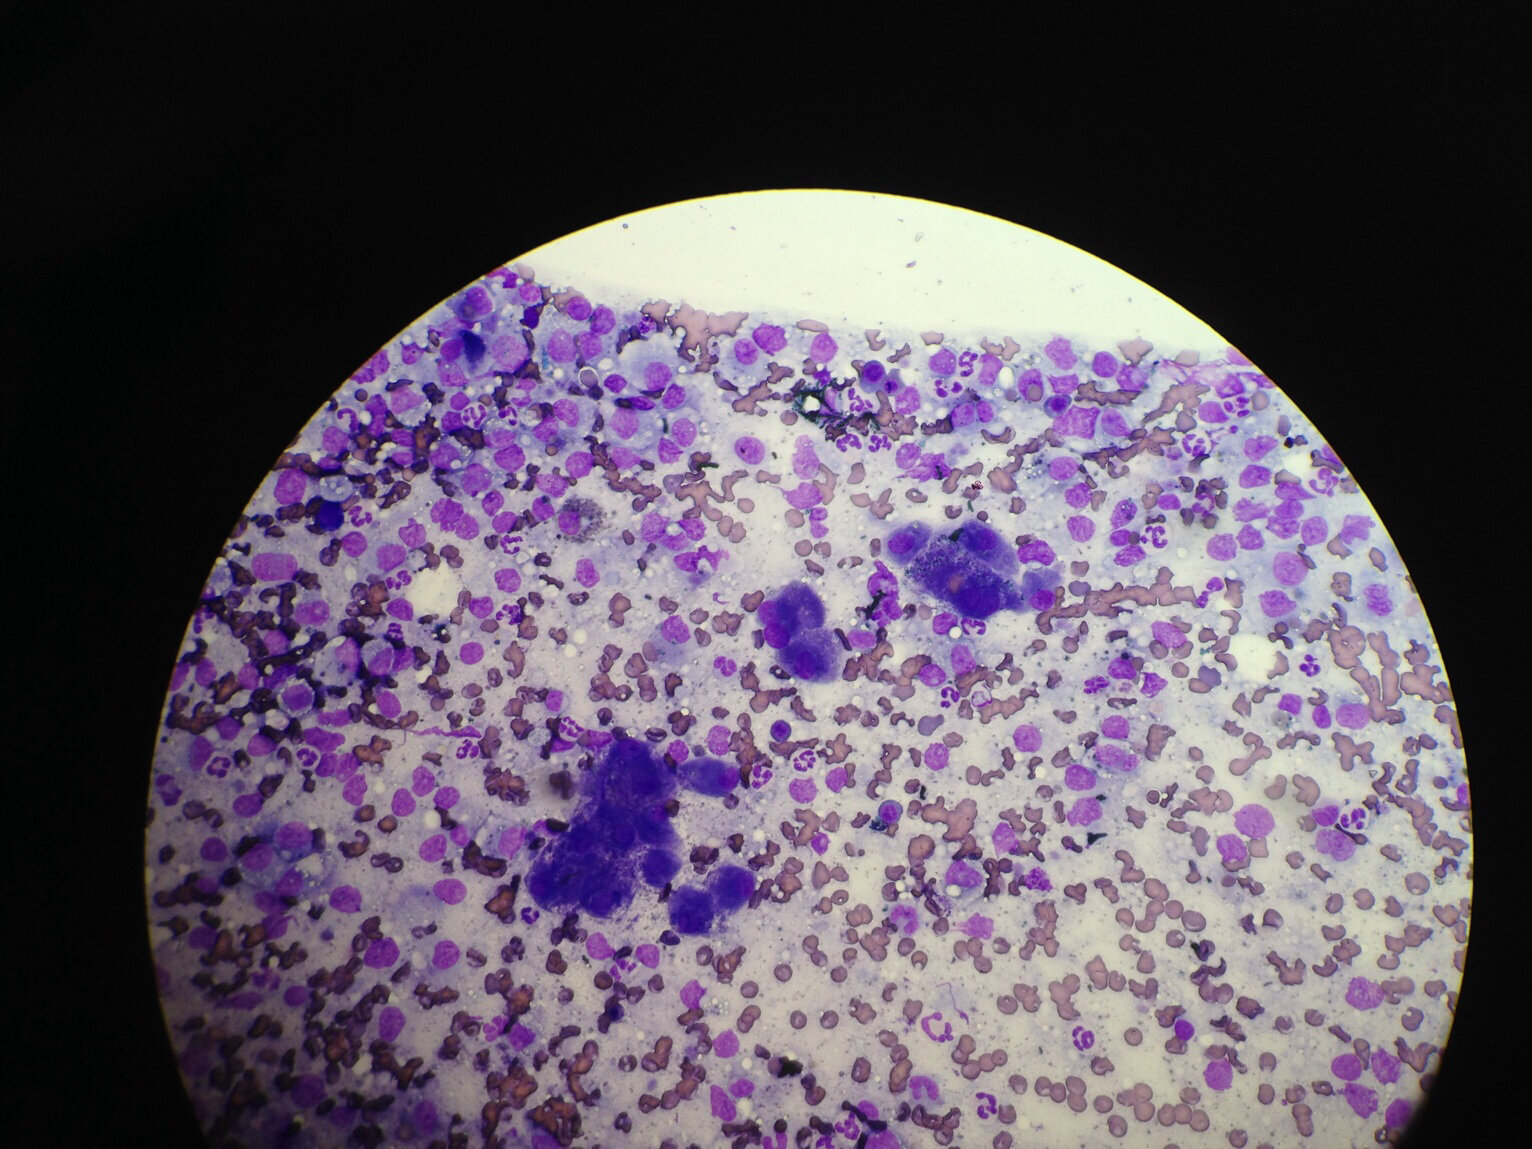 What is your diagnosis? Cytology of the liver.